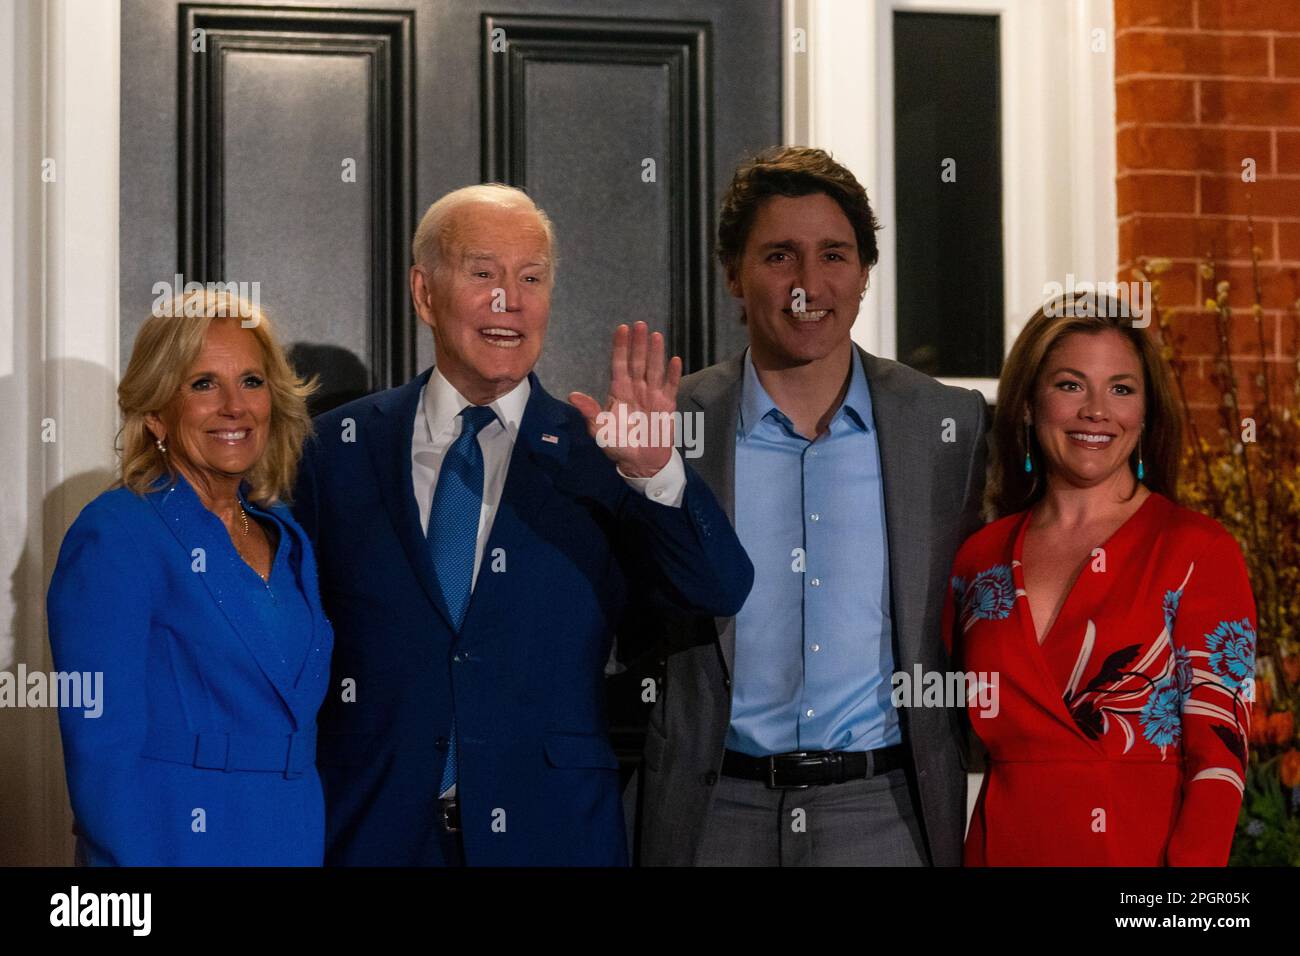 U.S. President Joe Biden (L2) holds up his hand as he poses for a photo with U.S. First Lady Jill Biden (L), Canadian Prime Minister Justin Trudeau (R2), and Canadian First Lady Sophie Grégoire Trudeau (R) during his first official visit to the country since he became president, outside of Rideau Cottage in Ottawa. Though visits from American presidents to Canada typically take place soon after election, Biden's inaugural visit to the northern neighbour has been delayed due to COVID-19 travel restrictions. (Photo by Katherine Cheng/SOPA Images/Sipa USA) Stock Photo